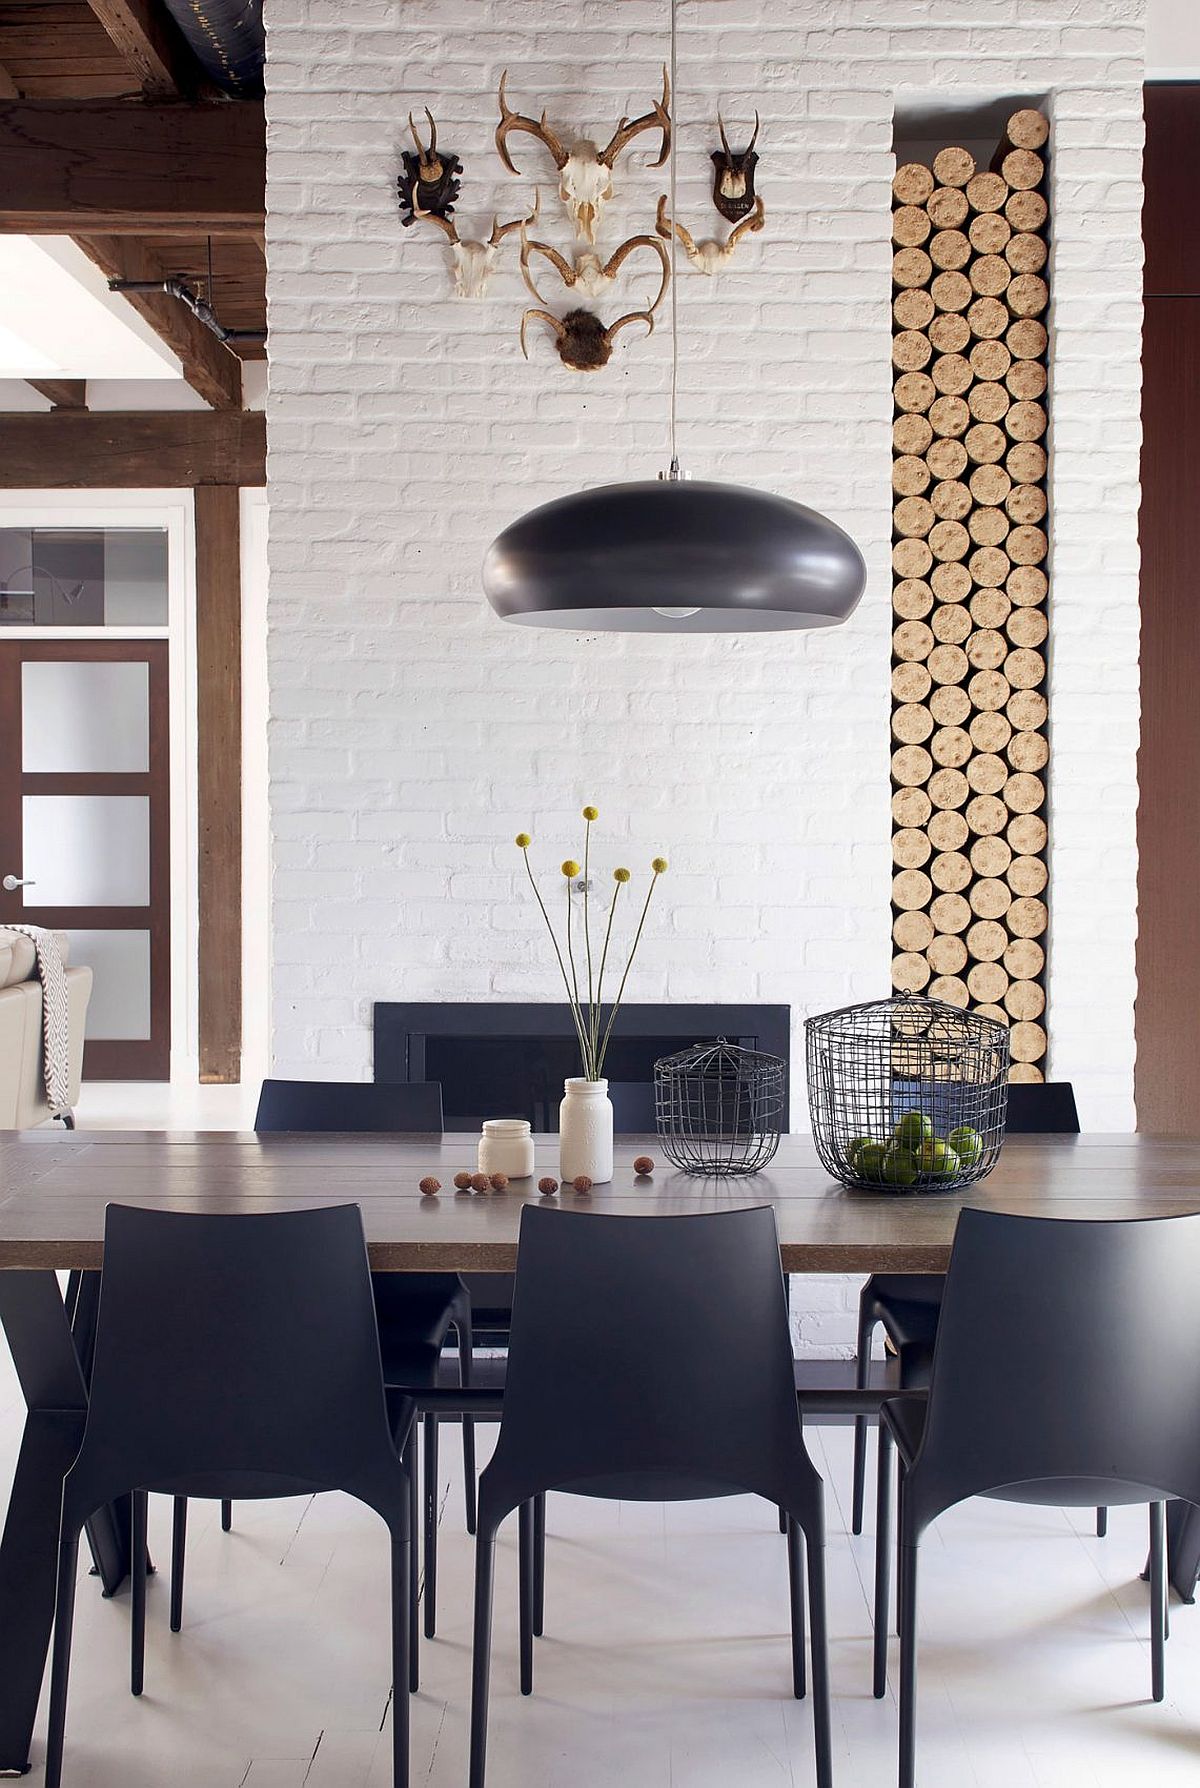 Stacked firewood adds textural beauty to the smart dining room